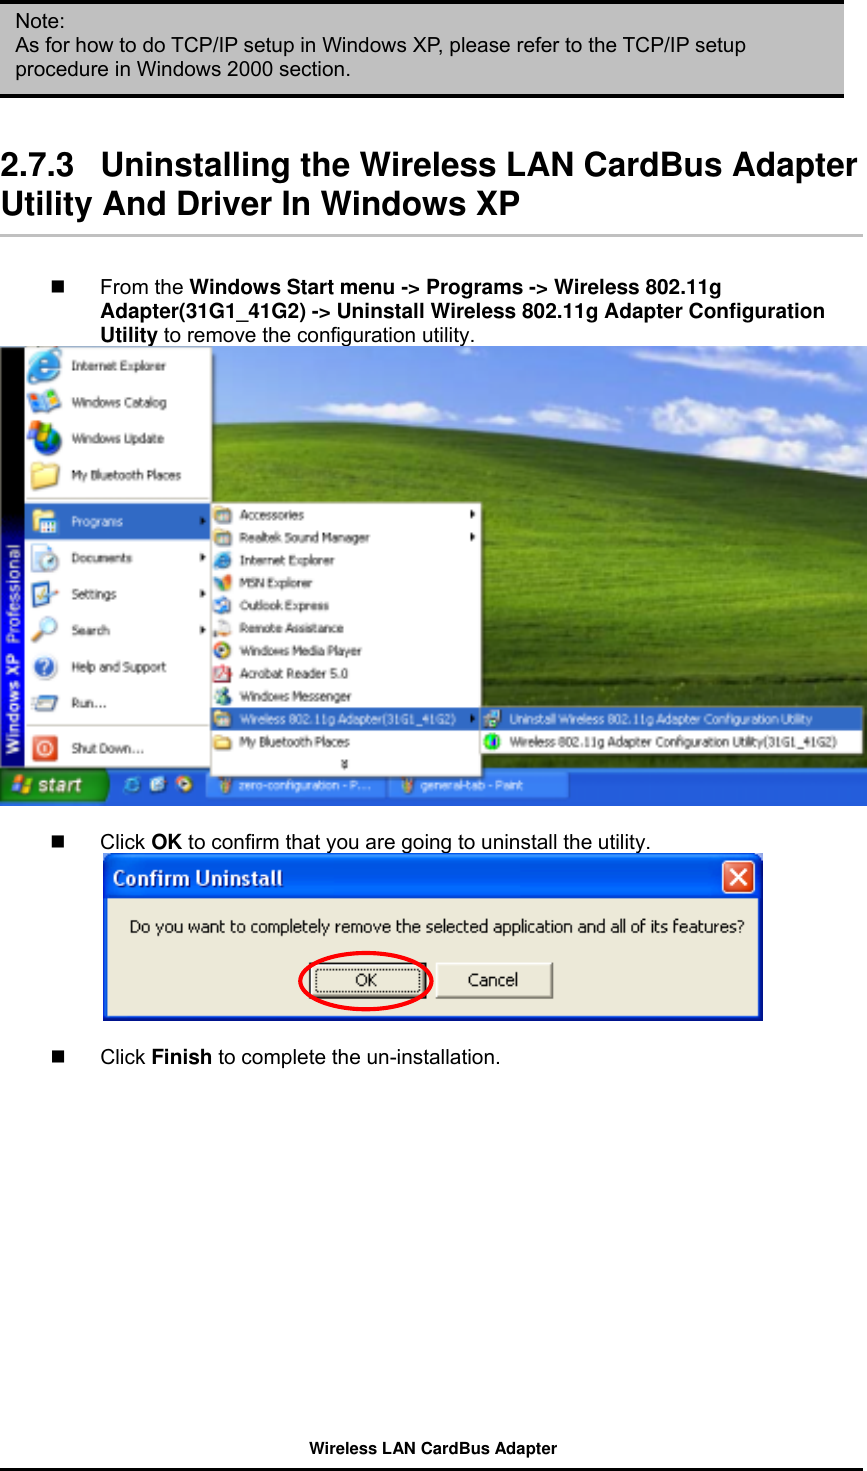      Note: As for how to do TCP/IP setup in Windows XP, please refer to the TCP/IP setup procedure in Windows 2000 section.    2.7.3  Uninstalling the Wireless LAN CardBus Adapter Utility And Driver In Windows XP     From the Windows Start menu -&gt; Programs -&gt; Wireless 802.11g Adapter(31G1_41G2) -&gt; Uninstall Wireless 802.11g Adapter Configuration Utility to remove the configuration utility.     Click OK to confirm that you are going to uninstall the utility.     Click Finish to complete the un-installation. Wireless LAN CardBus Adapter 